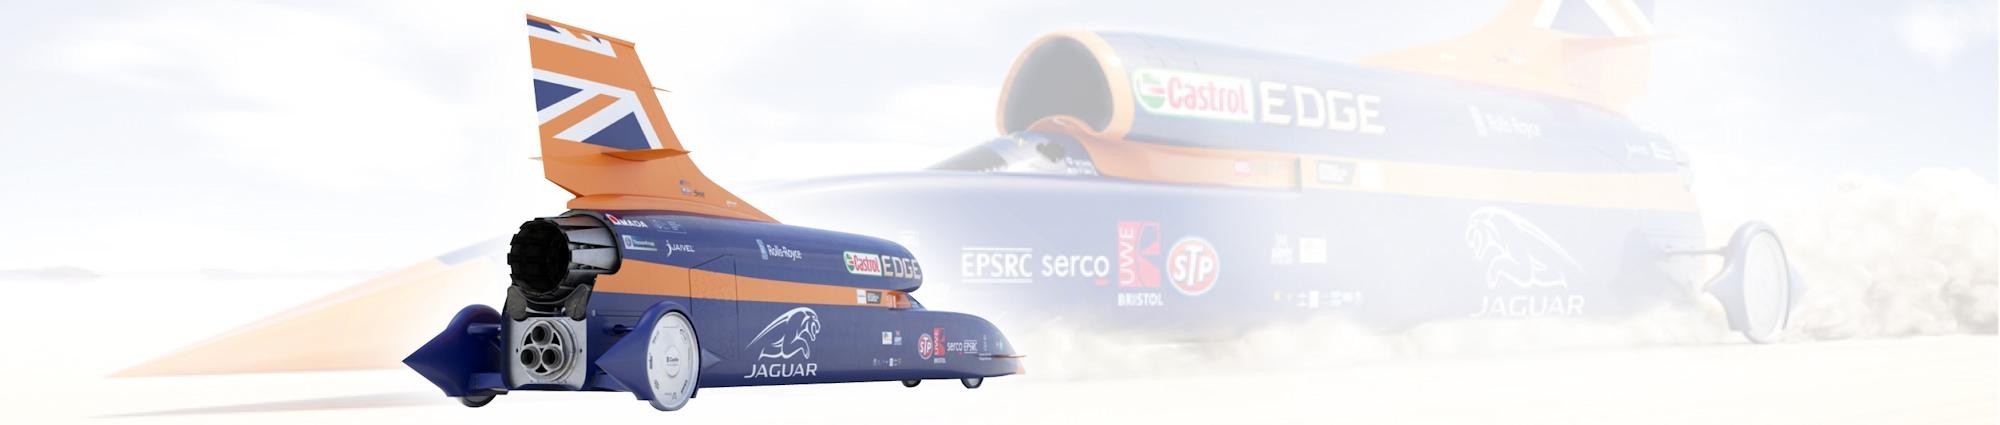 BLOODHOUND SSC Project